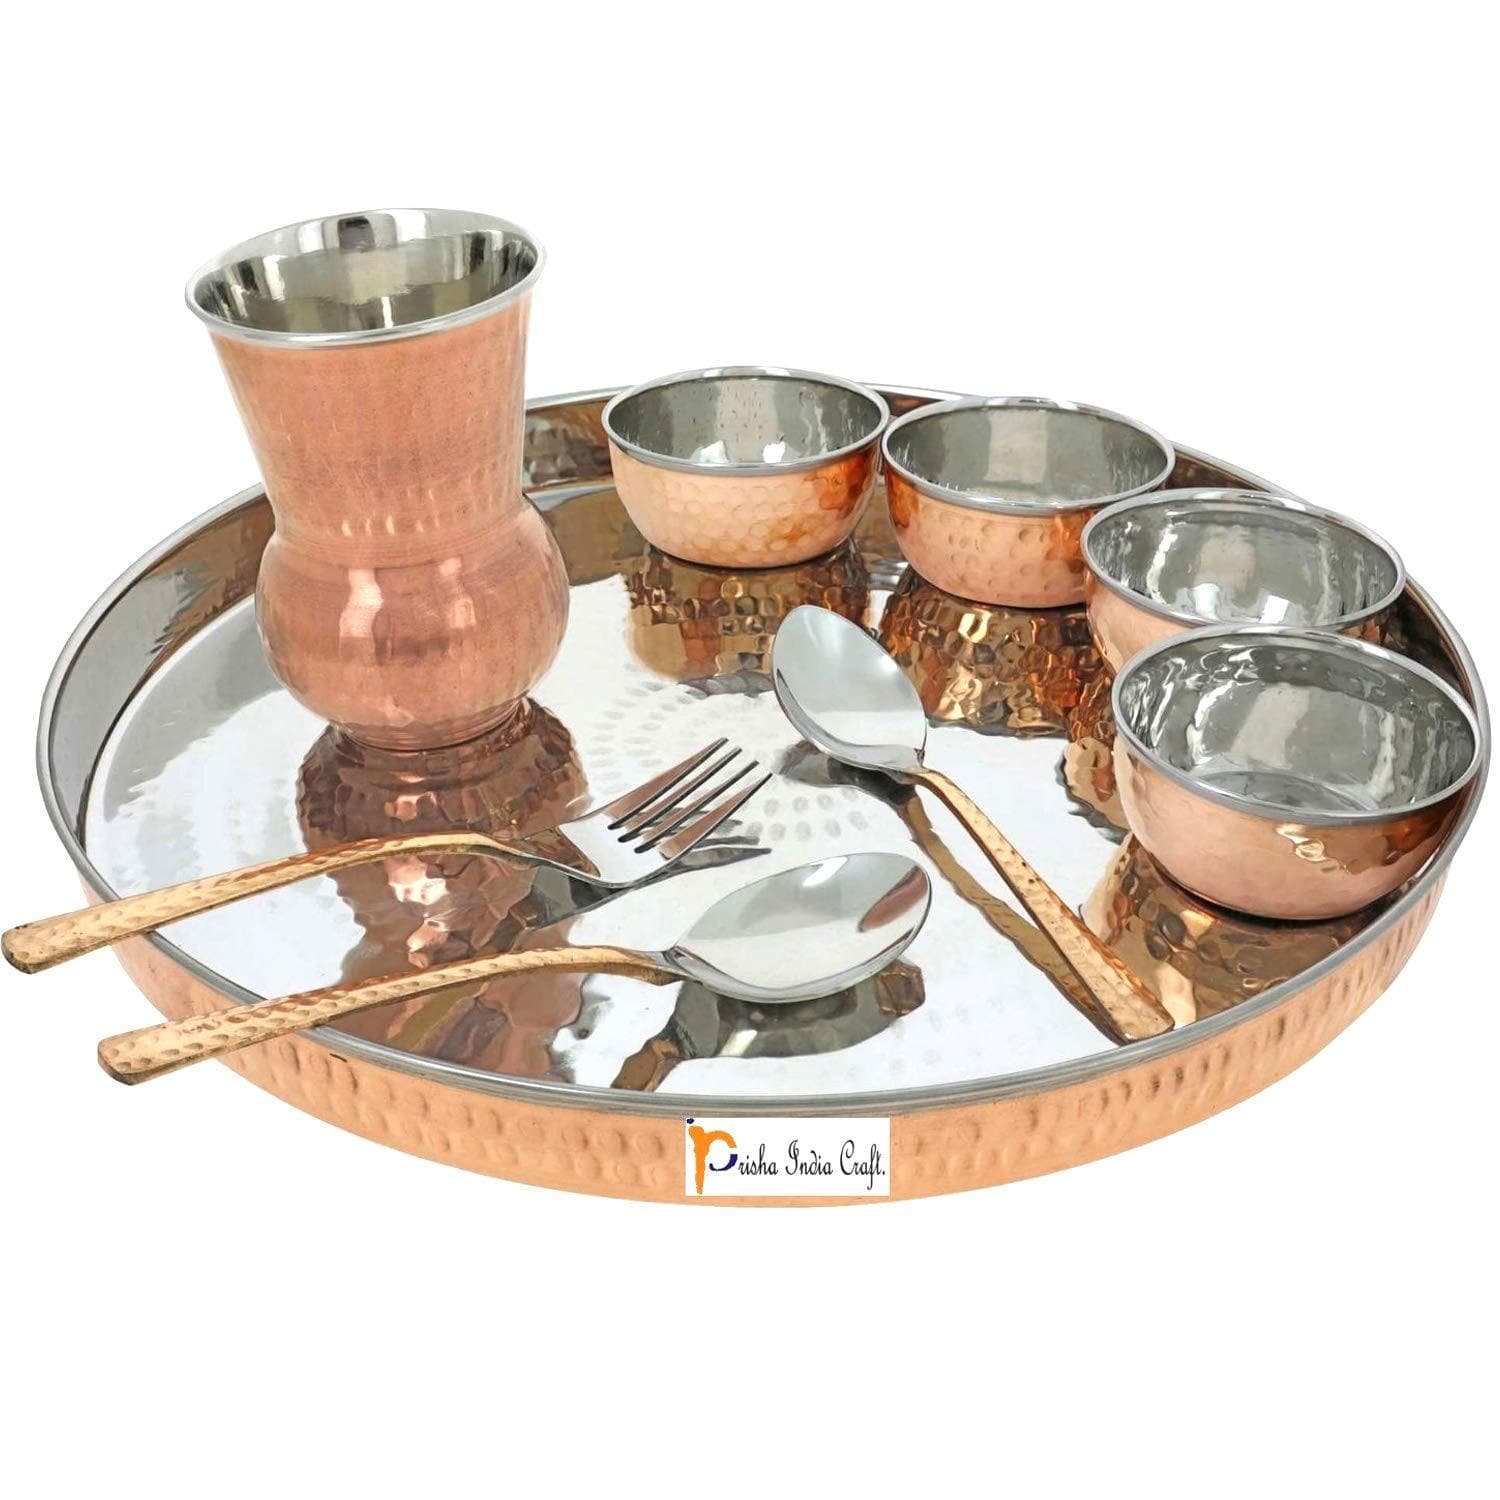 Dinnerware copper traditional dinner set of thali plate,bowls,fork,glass spoon and serving spoon 13inch | PRISHA INDIA CRAFT - halfpeapp